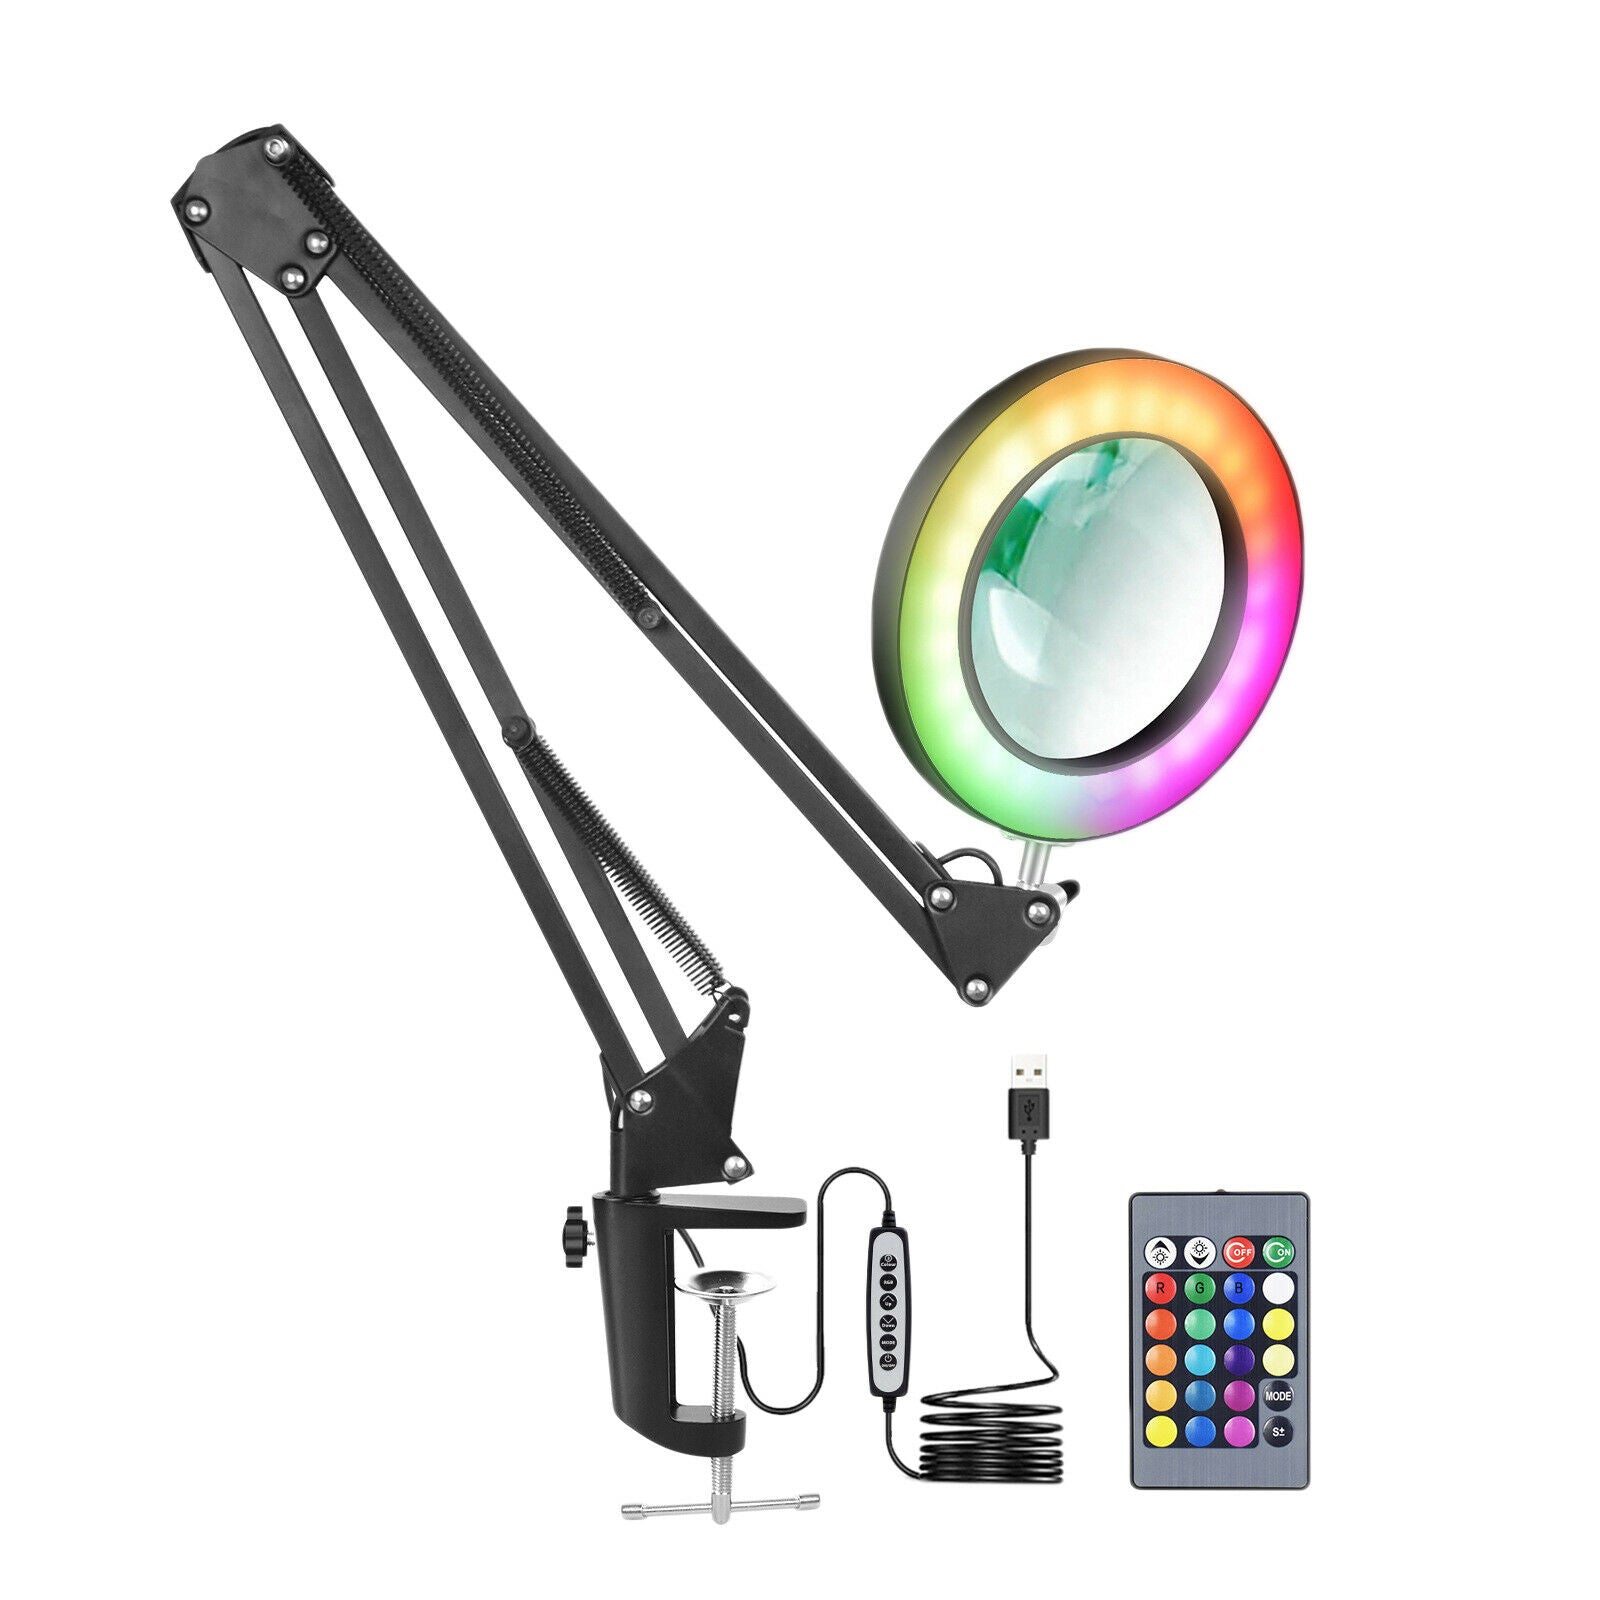 5x Magnifying Glass with Light USB Powered 3 Colors Illuminated for Reading